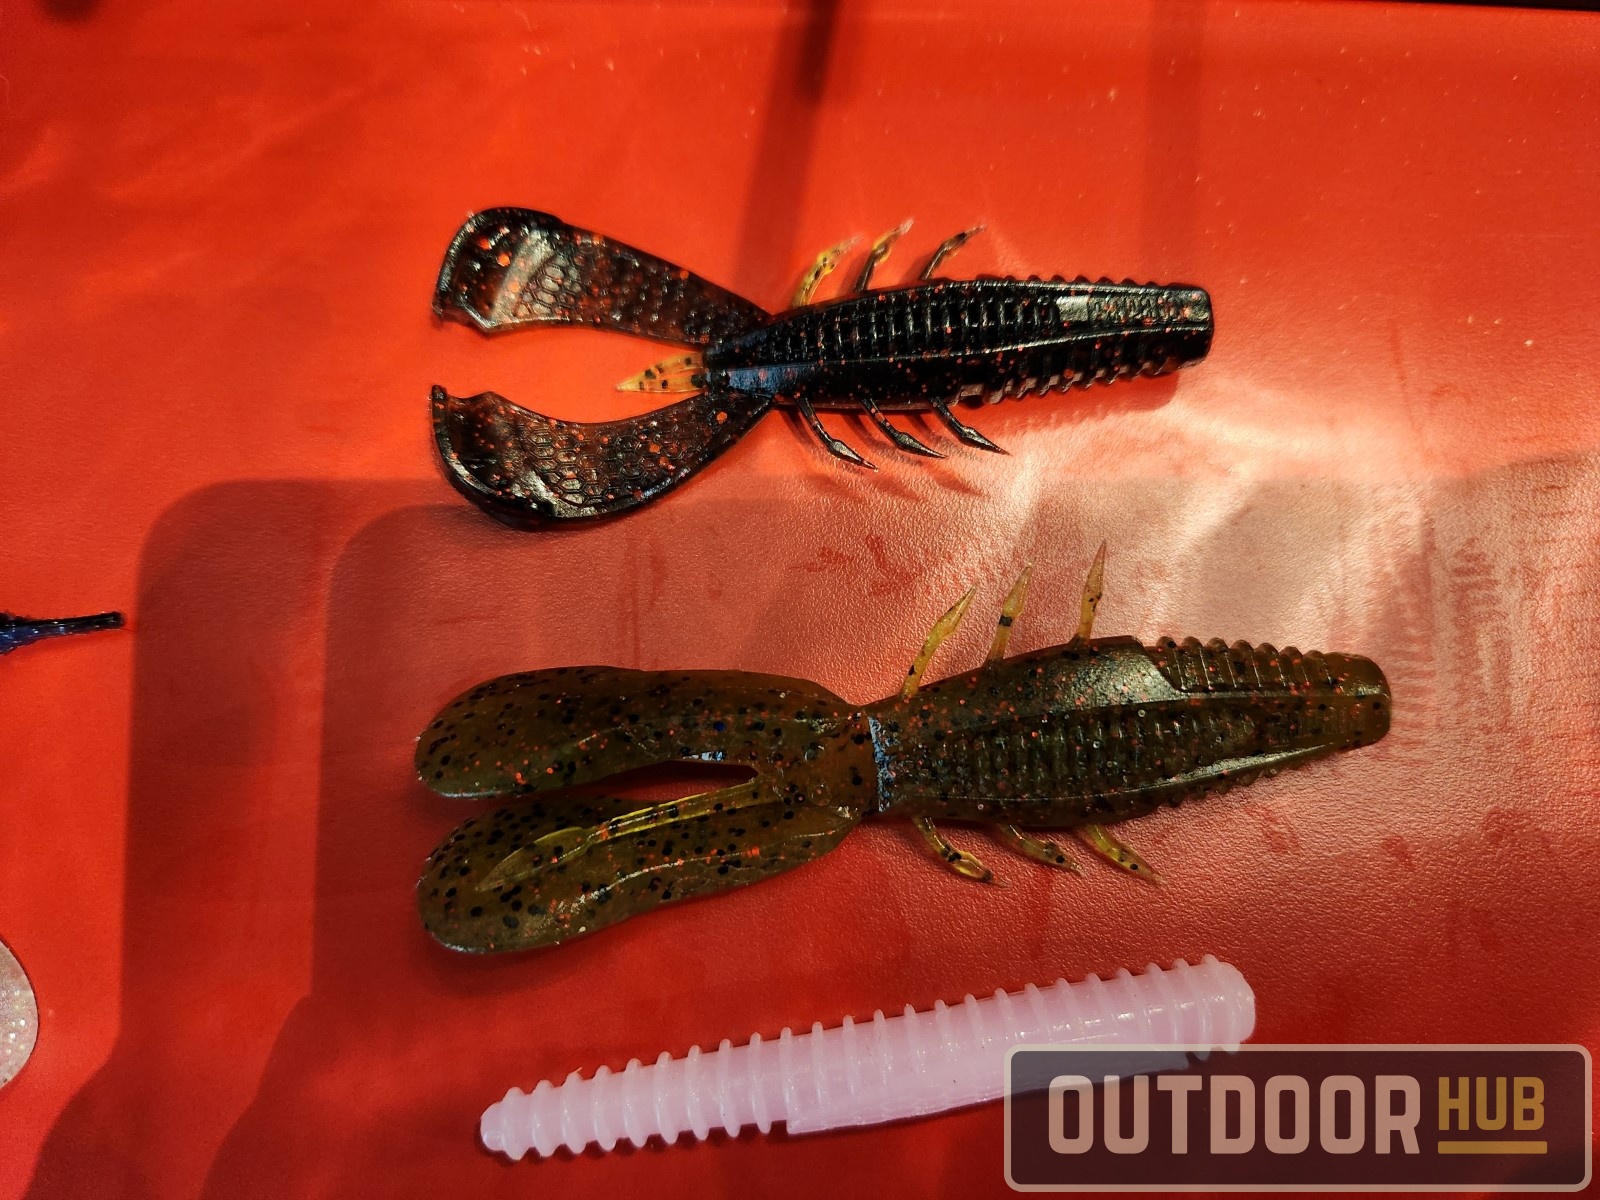 ALL NEW! Crush City soft baits produced by @rapala These premium